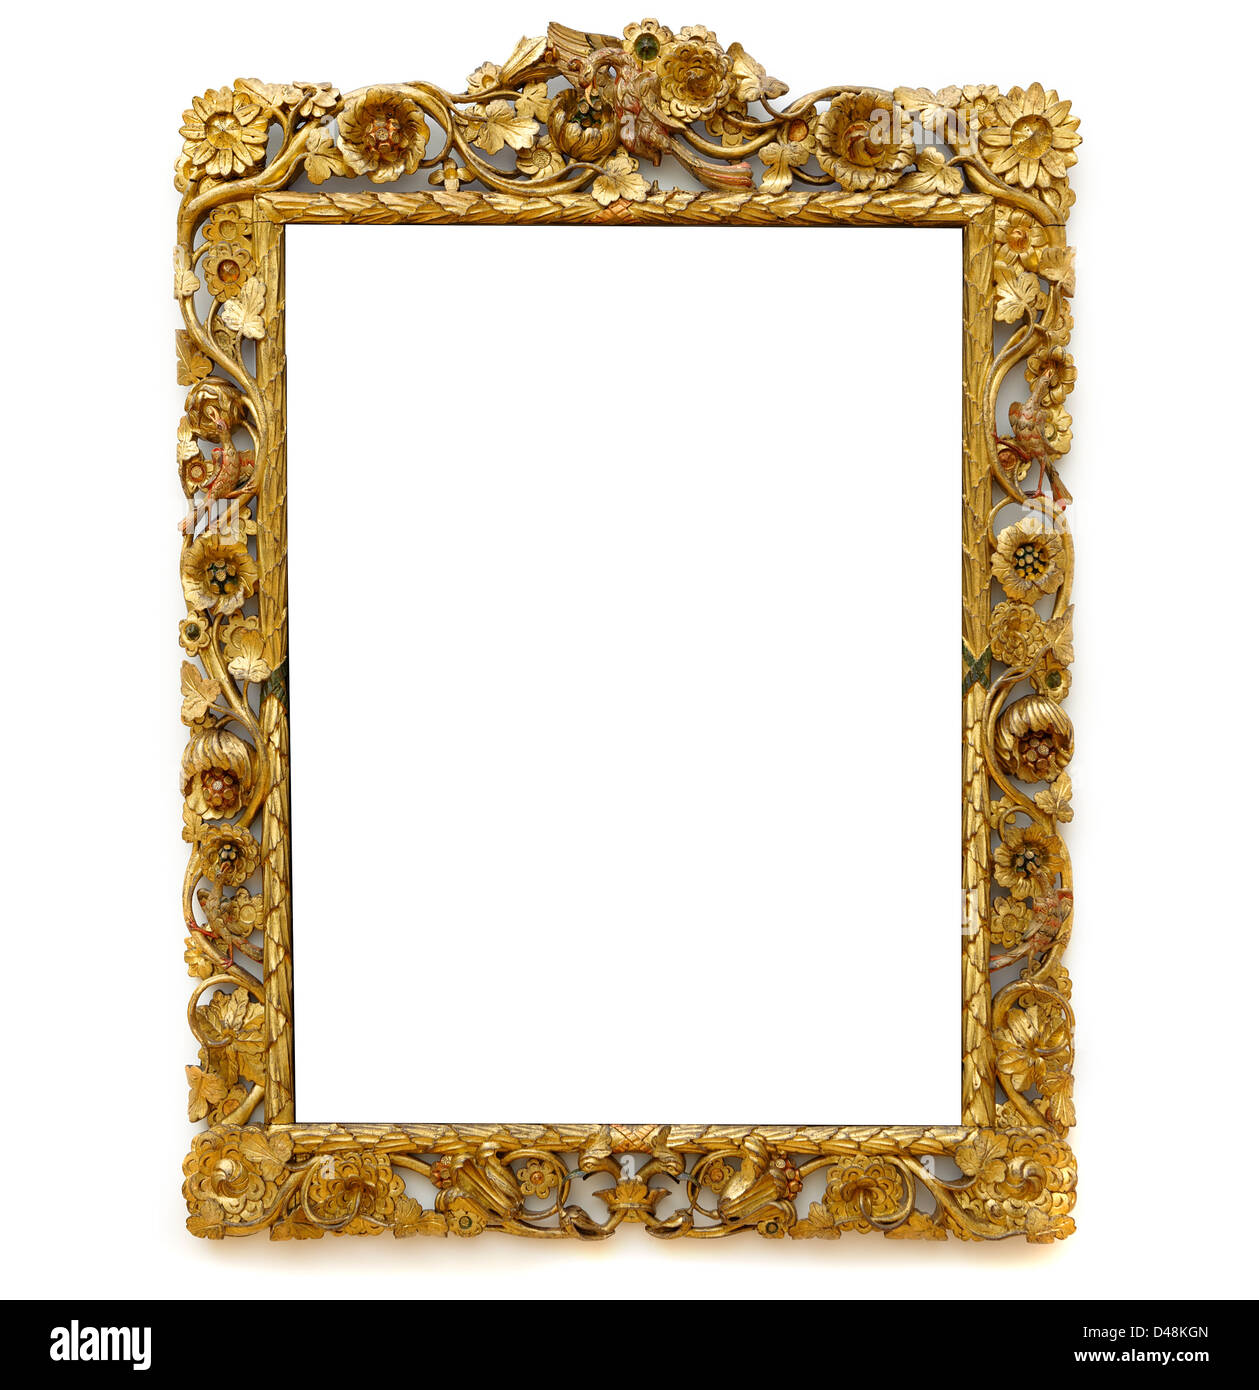 Ornate golden picture frame cut out isolated on white background Stock Photo